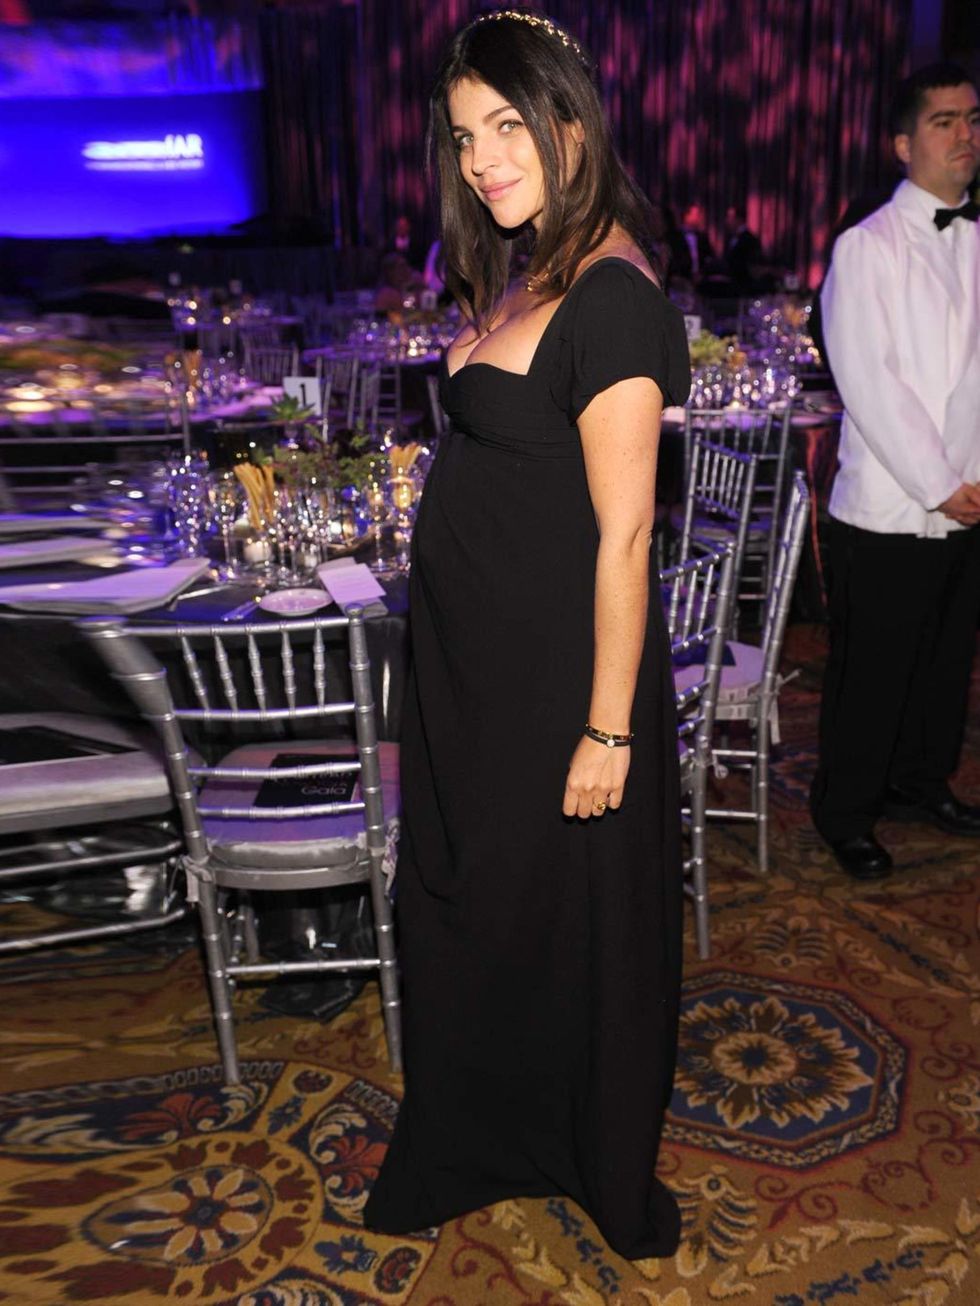 <p><a href="http://www.elleuk.com/star-style/celebrity-style-files/julia-restoin-roitfeld">Julia Restoin-Roitfeld</a> shows off he baby bump at the amfAR New York Gala to kick off A/W 2012 Fashion Week</p>